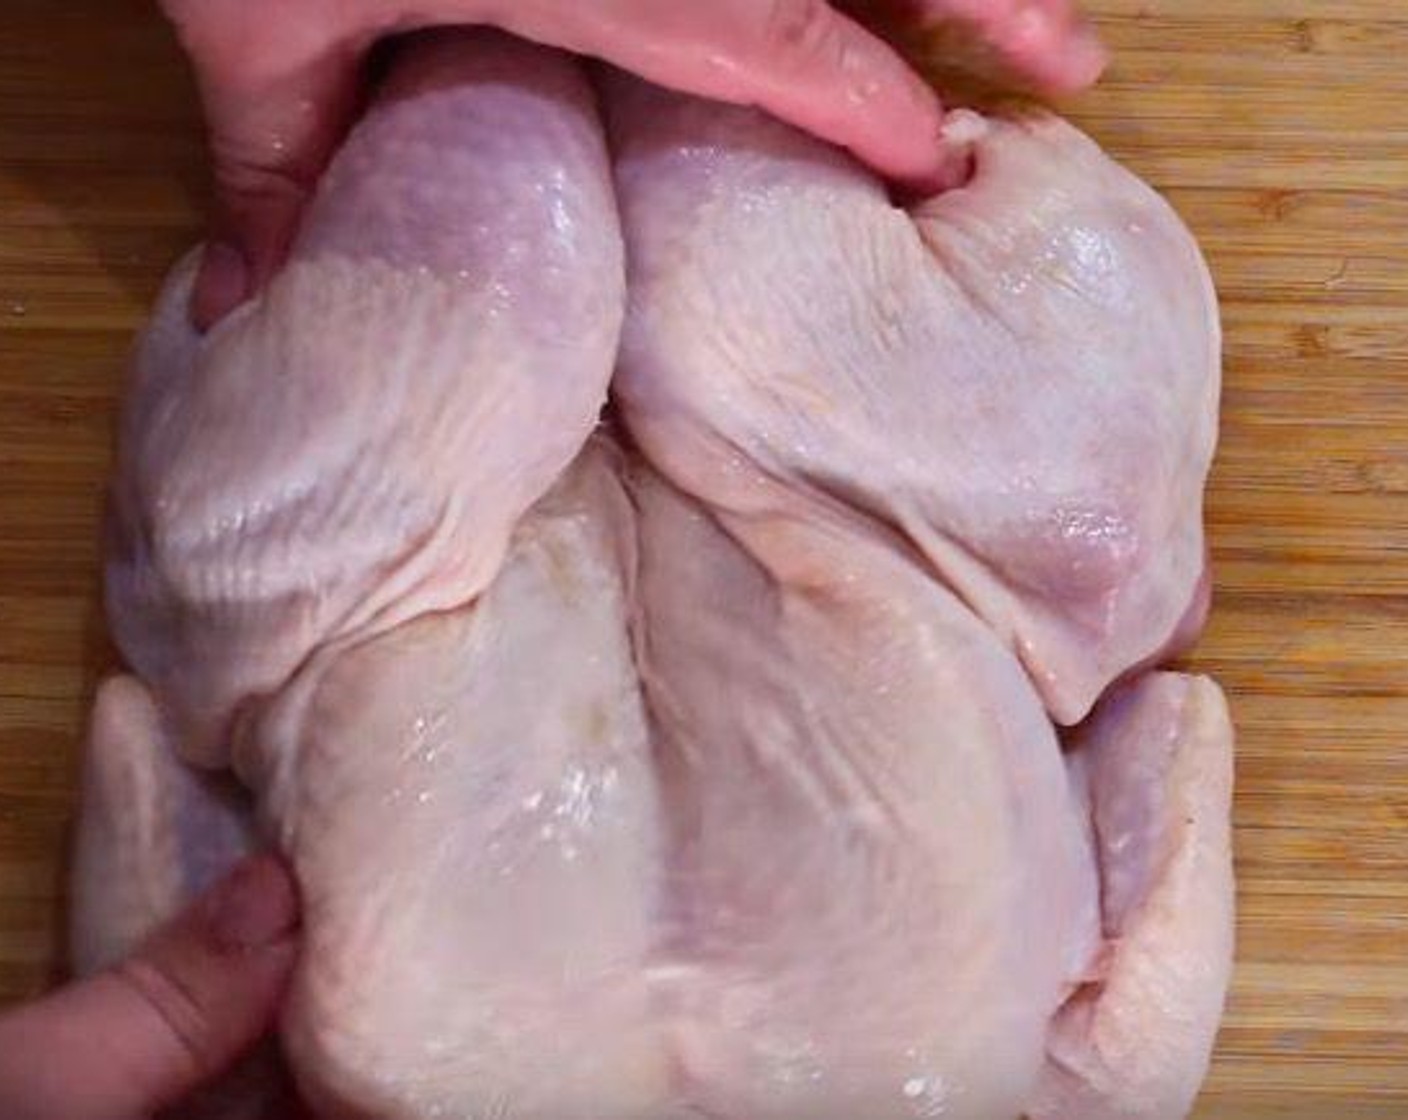 step 2 Carefully open up the chicken. Using a sharp knife, cut out the ribs and breastbone. Turn the chicken back over and set aside.